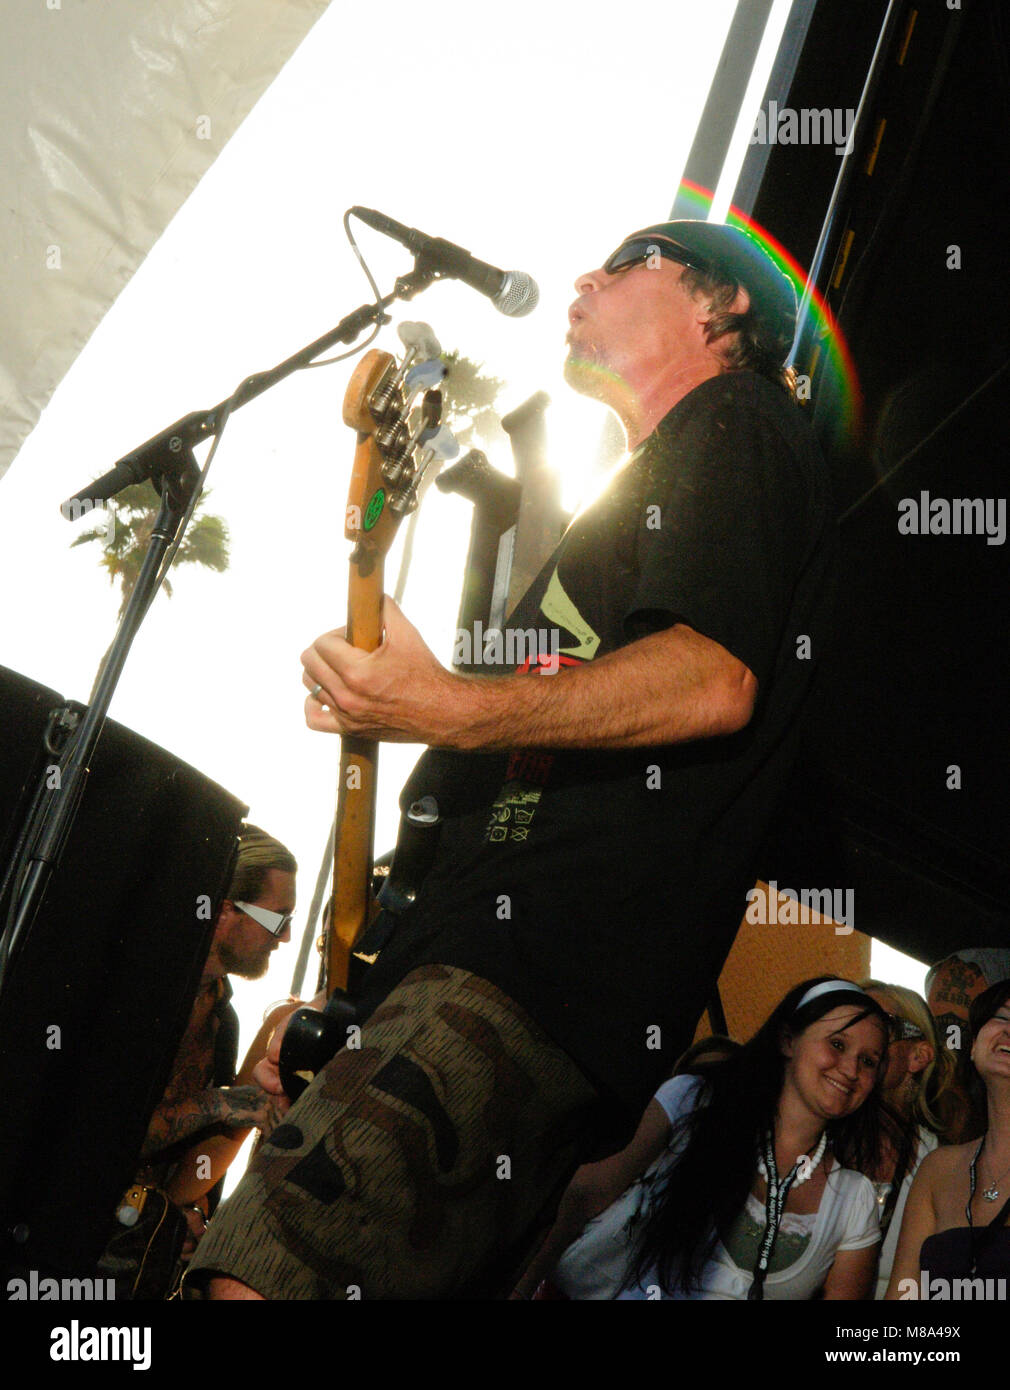 Randy Bradbury of Pennywise performs on stage during the Vans Warped Tour 2007. Stock Photo